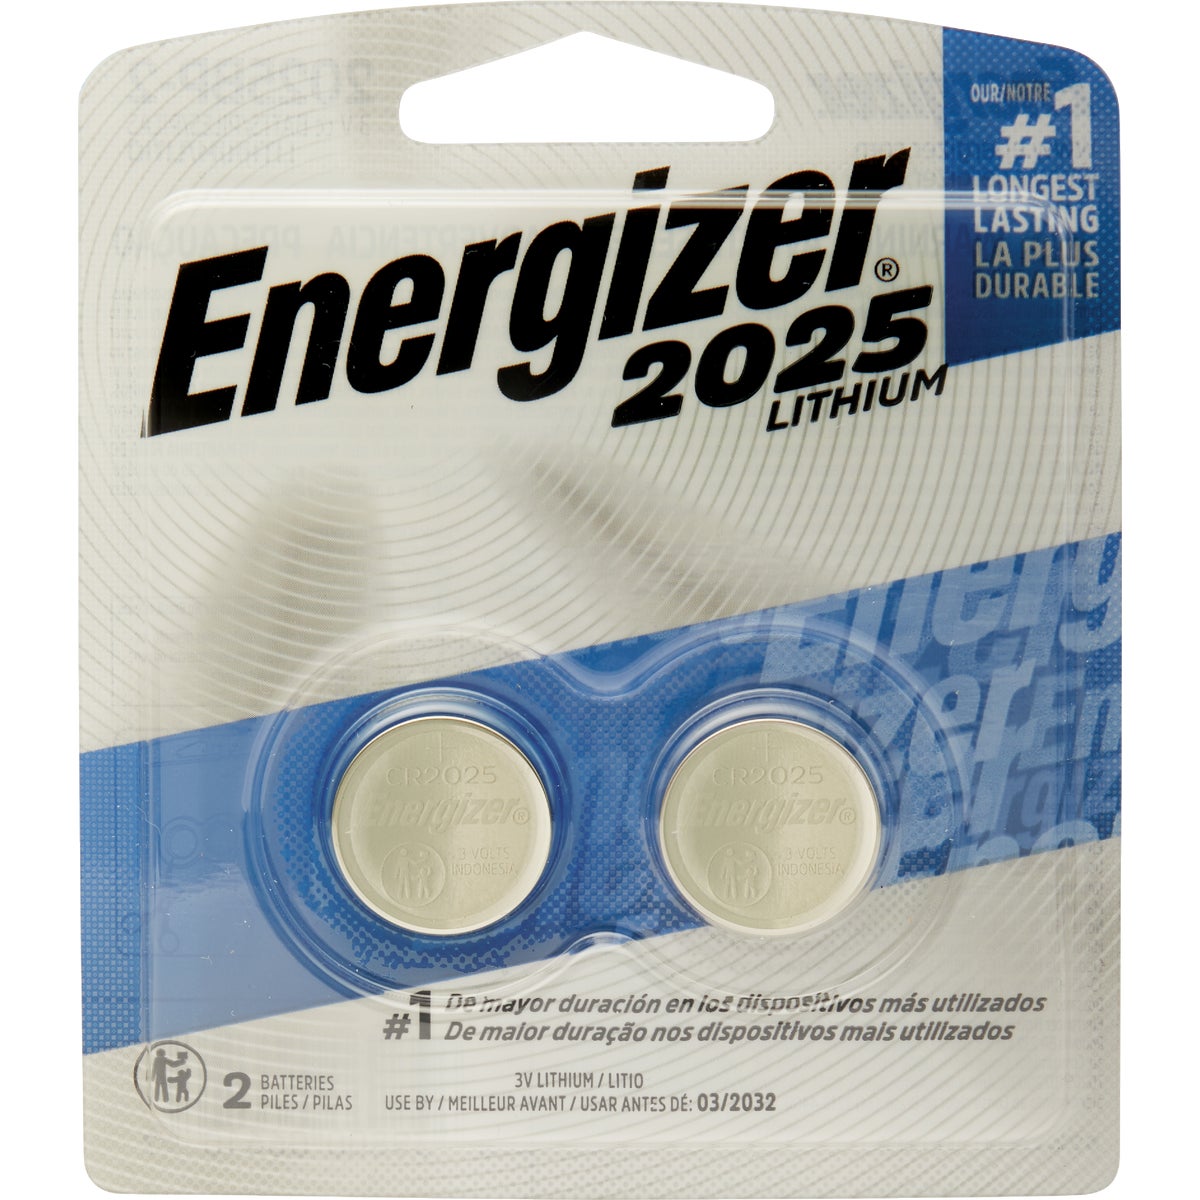 Energizer 2025 Lithium Coin Cell Battery (2-Pack)